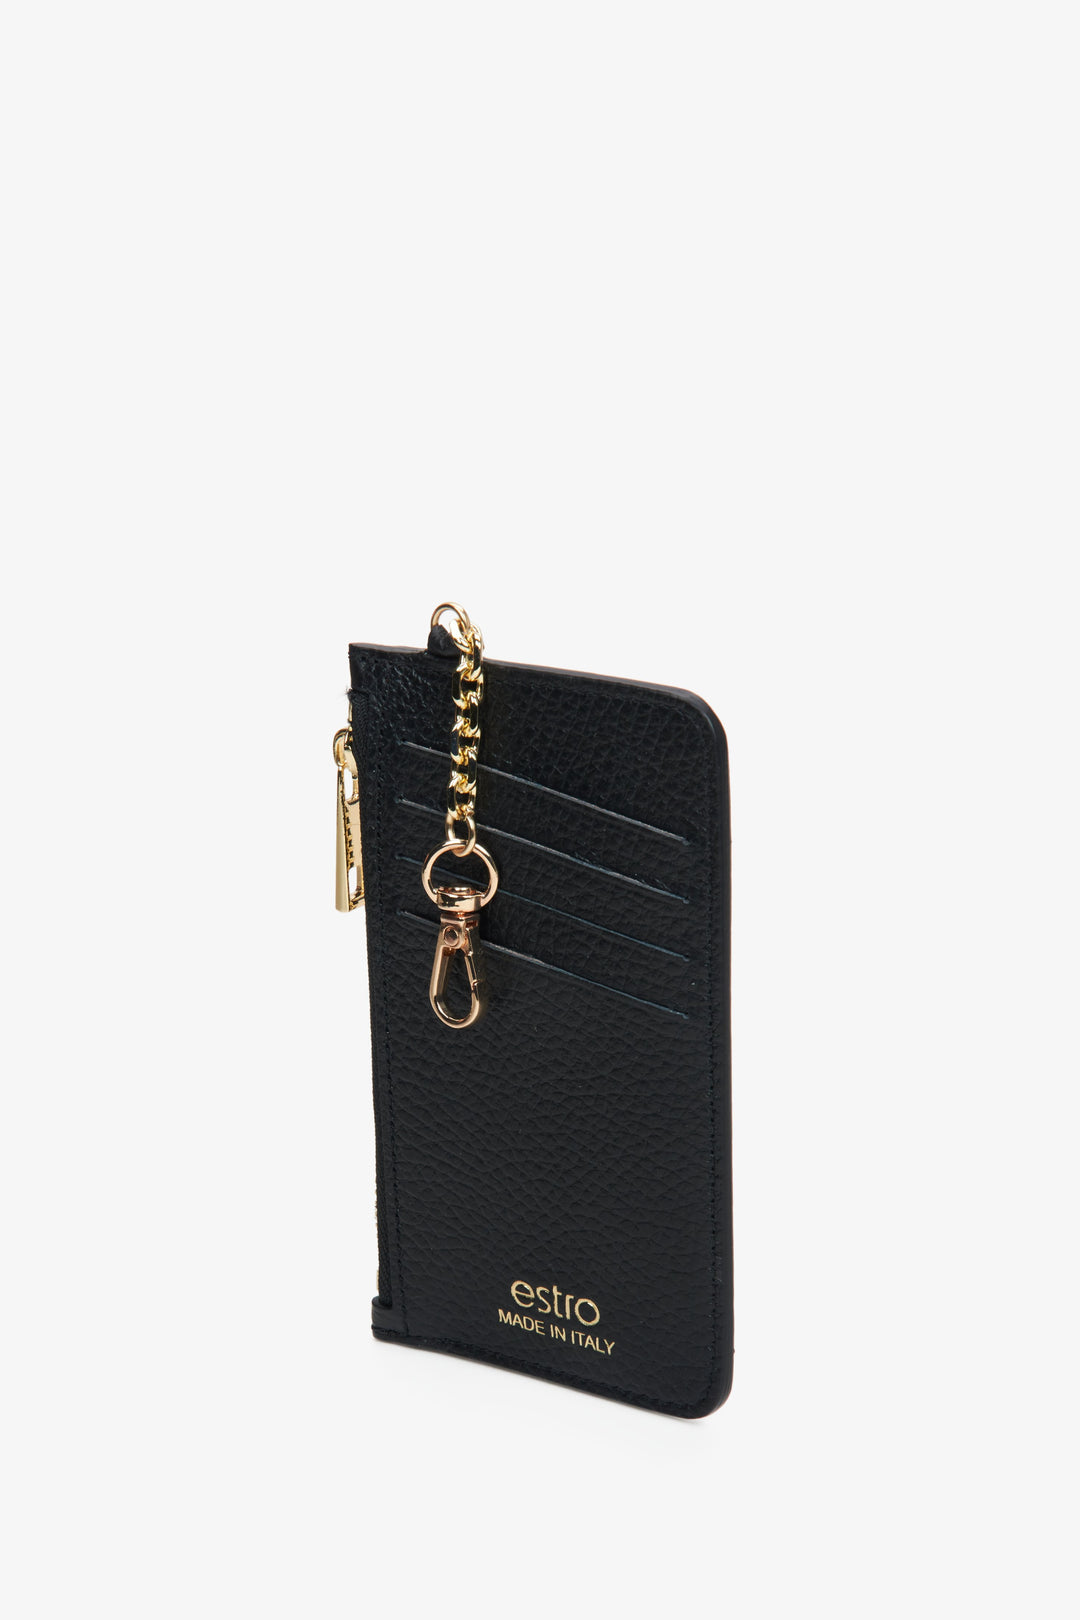 Estro compact black women's wallet made of genuine leather.